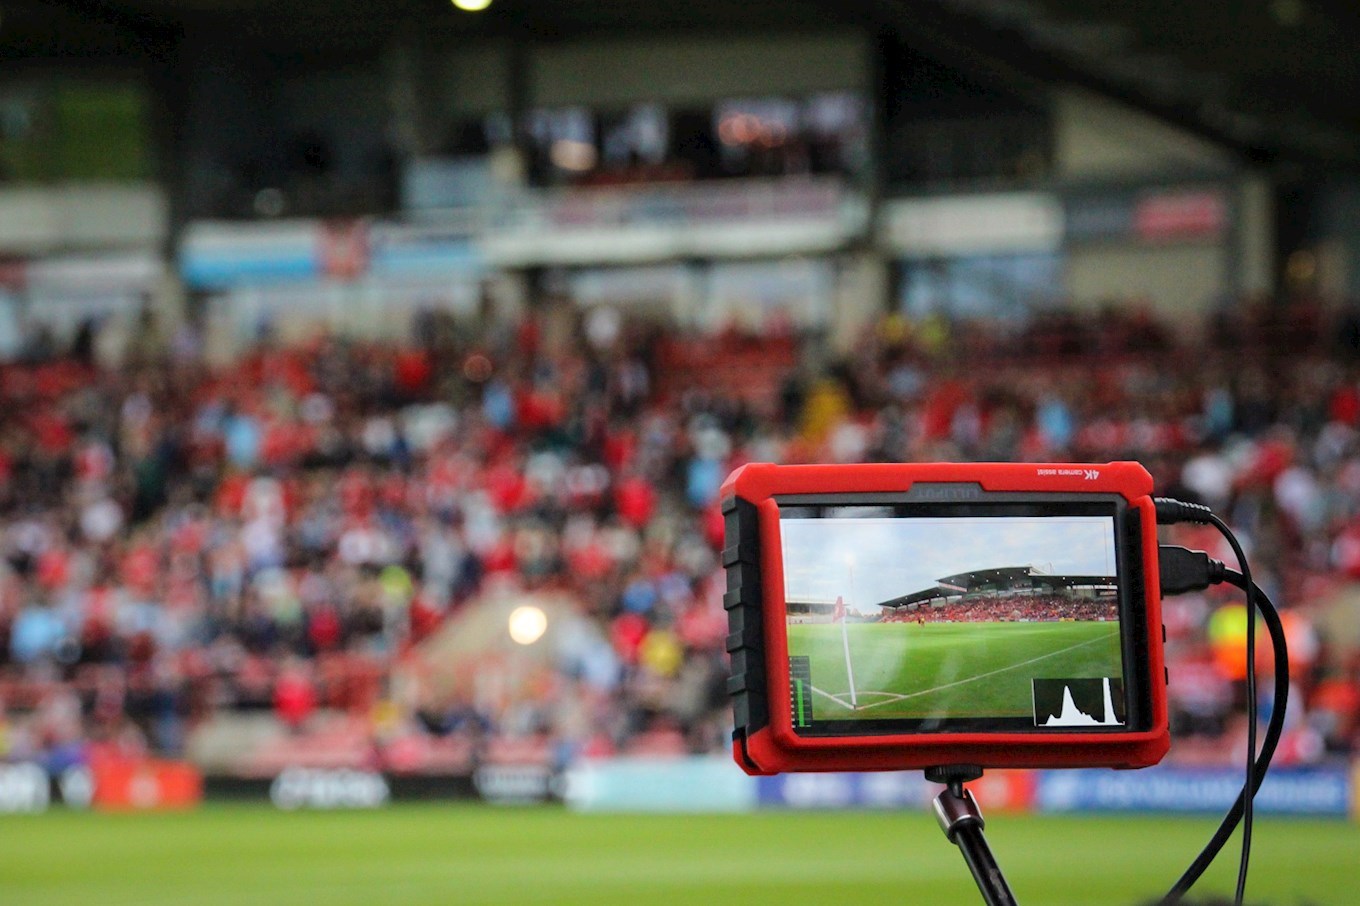 WATCH LIVE Wrexham AFC vs York City to be streamed live and worldwide - News